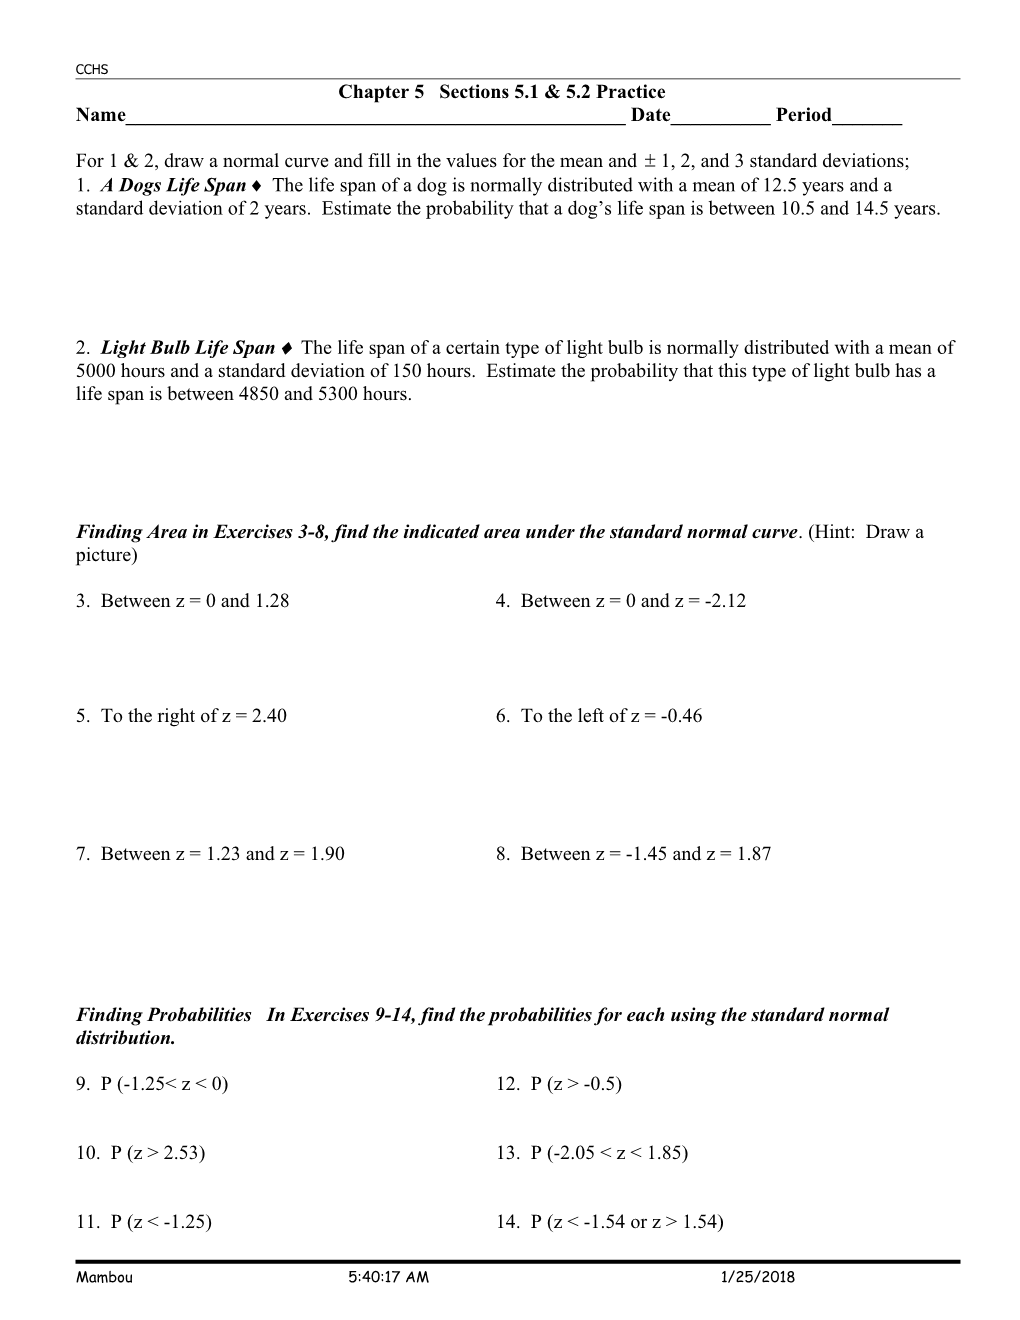 Math Tech IV Chapter 5 Sections 5